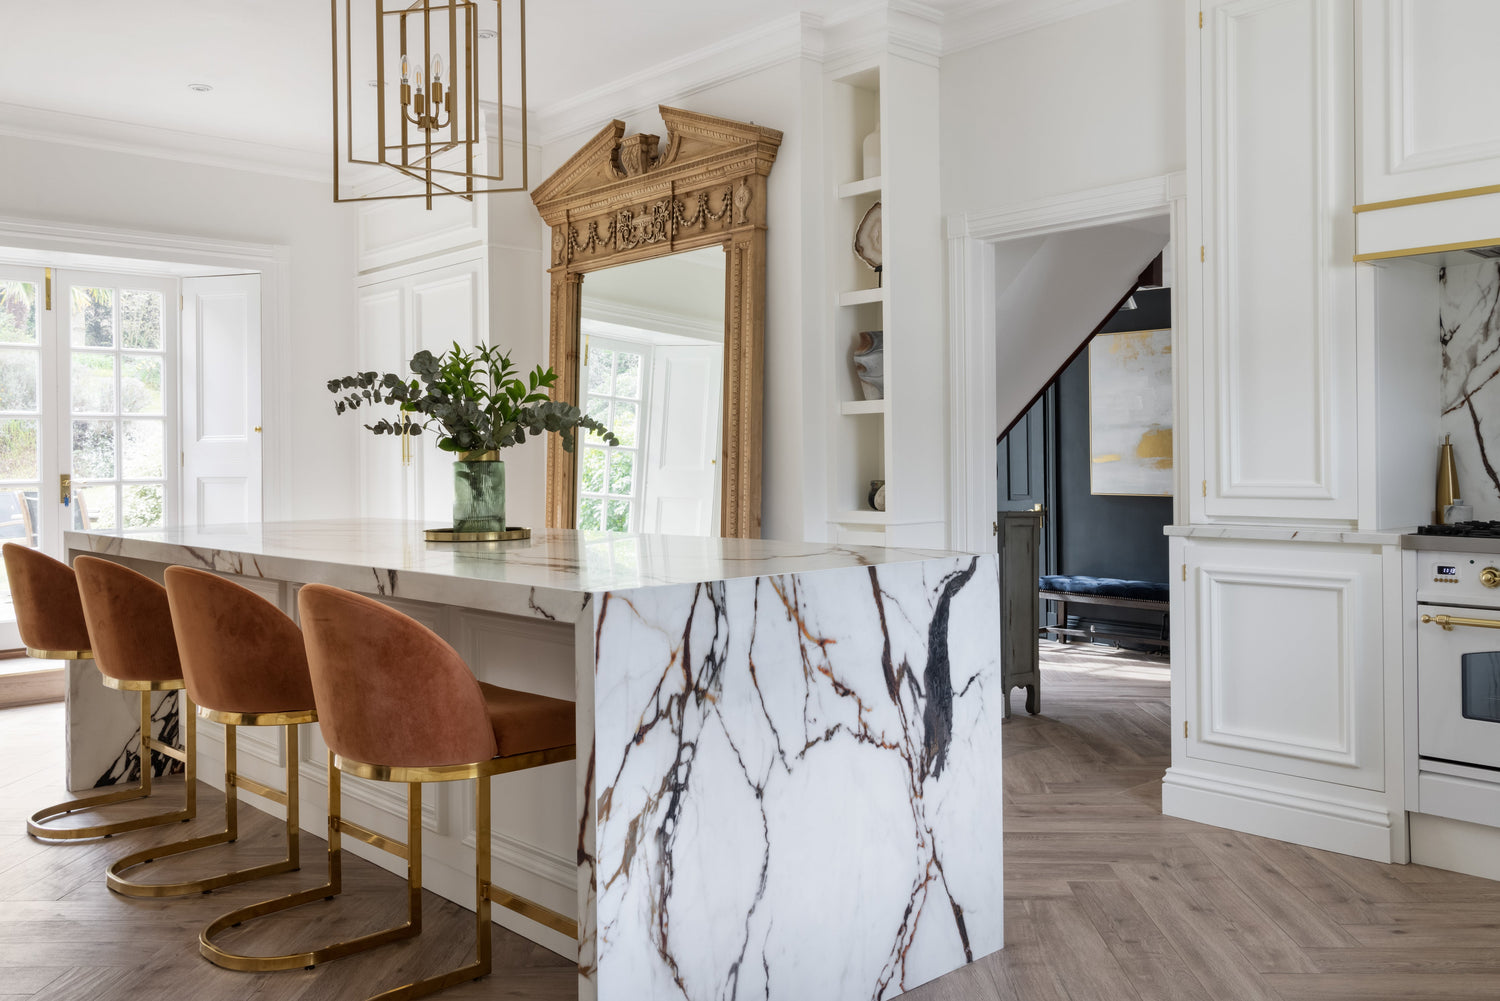 The White and Gold Handleless Kitchen